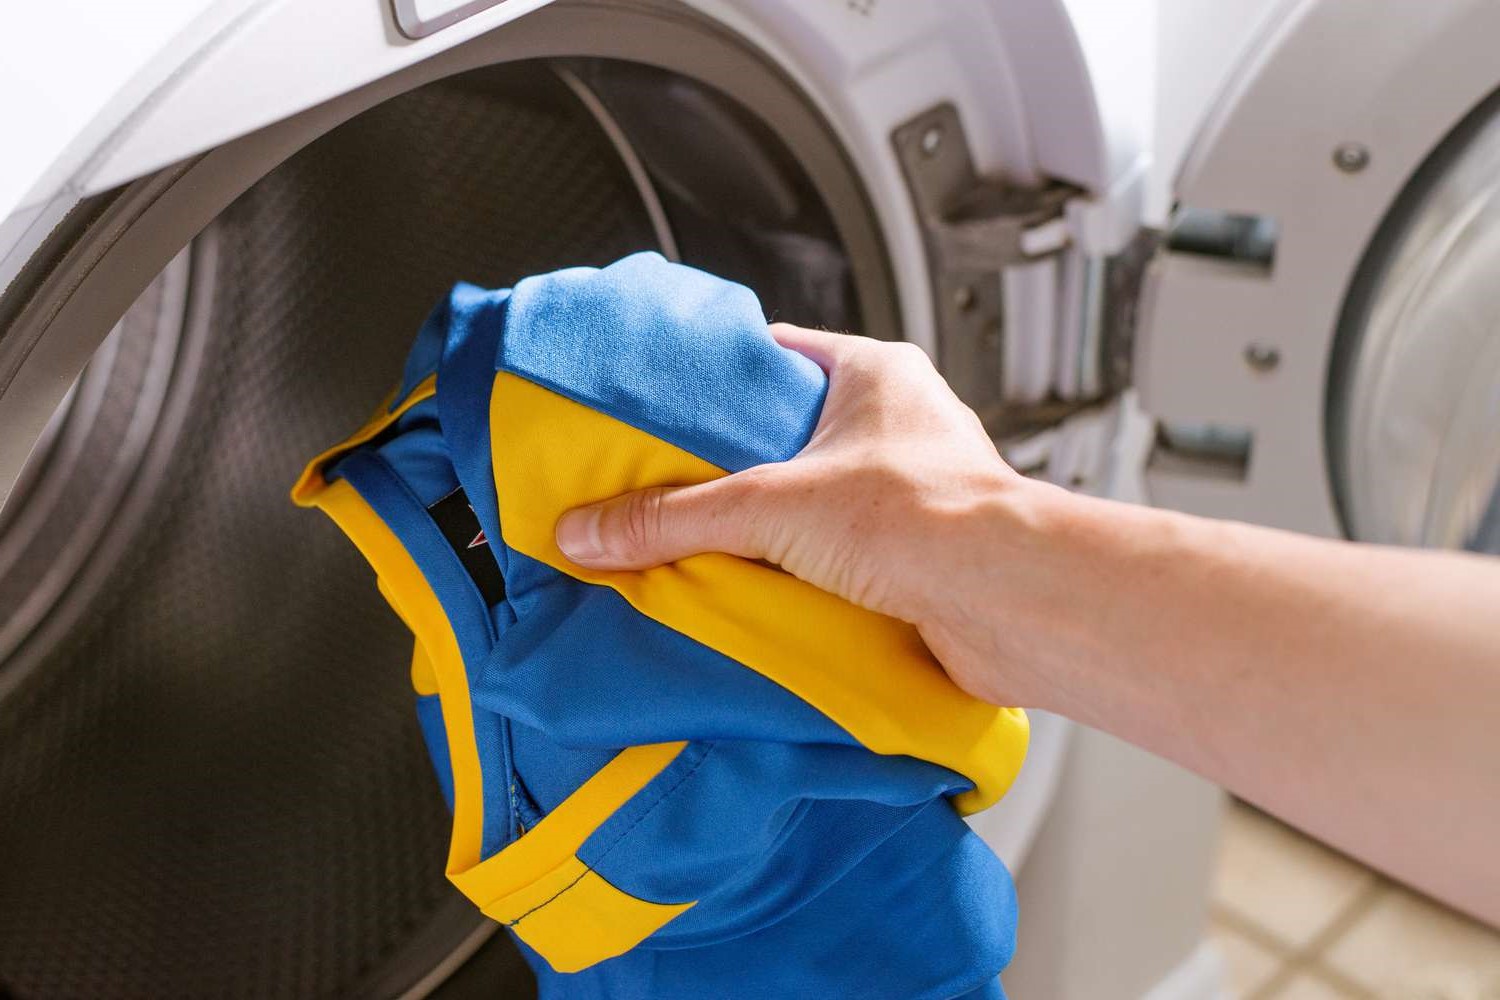 How To Wash Jerseys